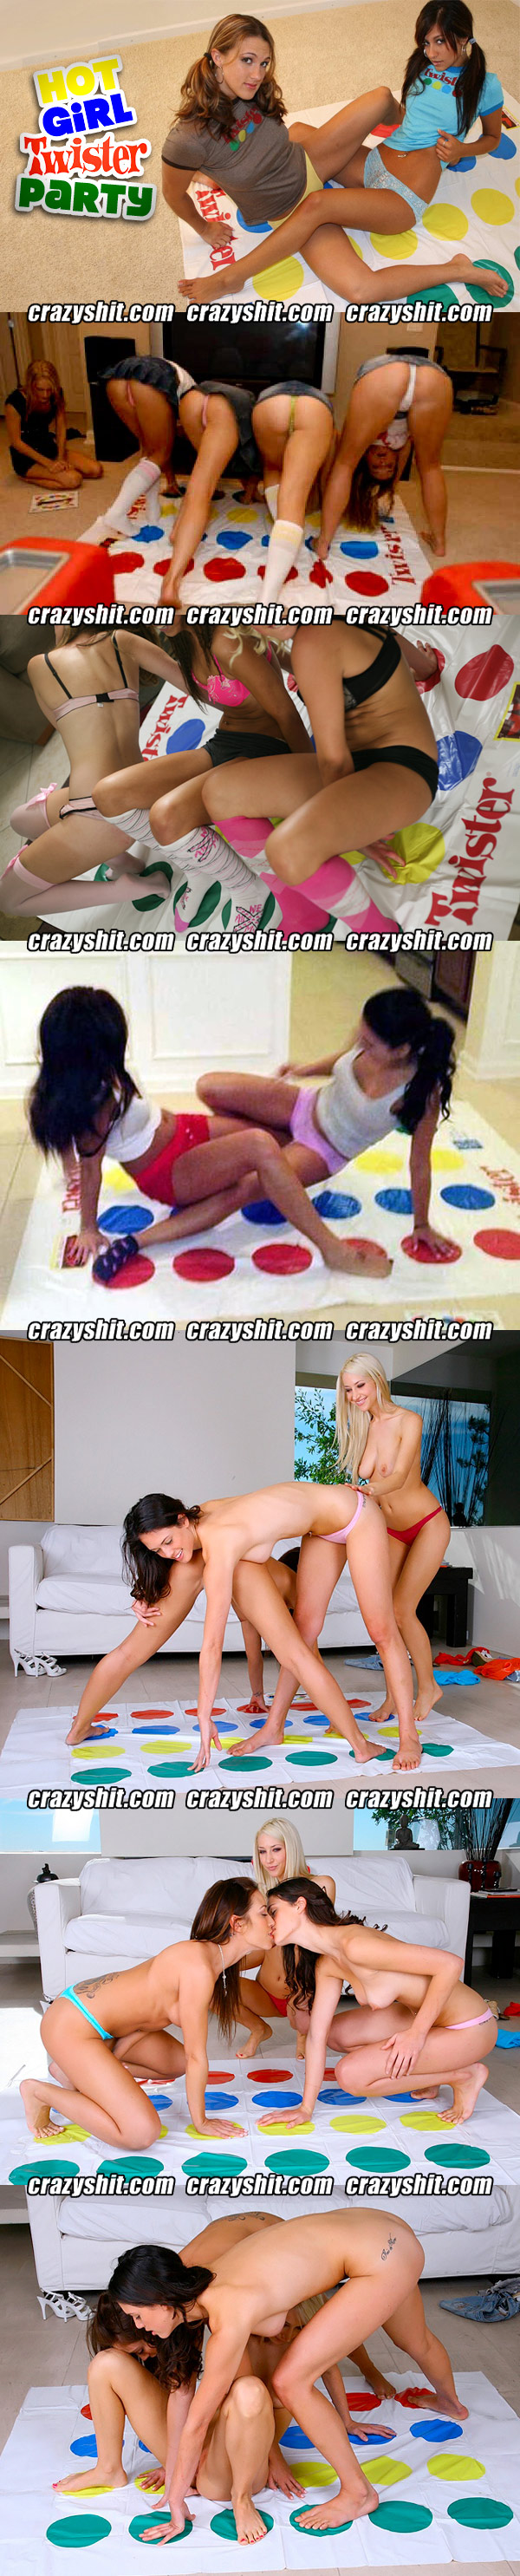 Hot Slutty Game Of Twister